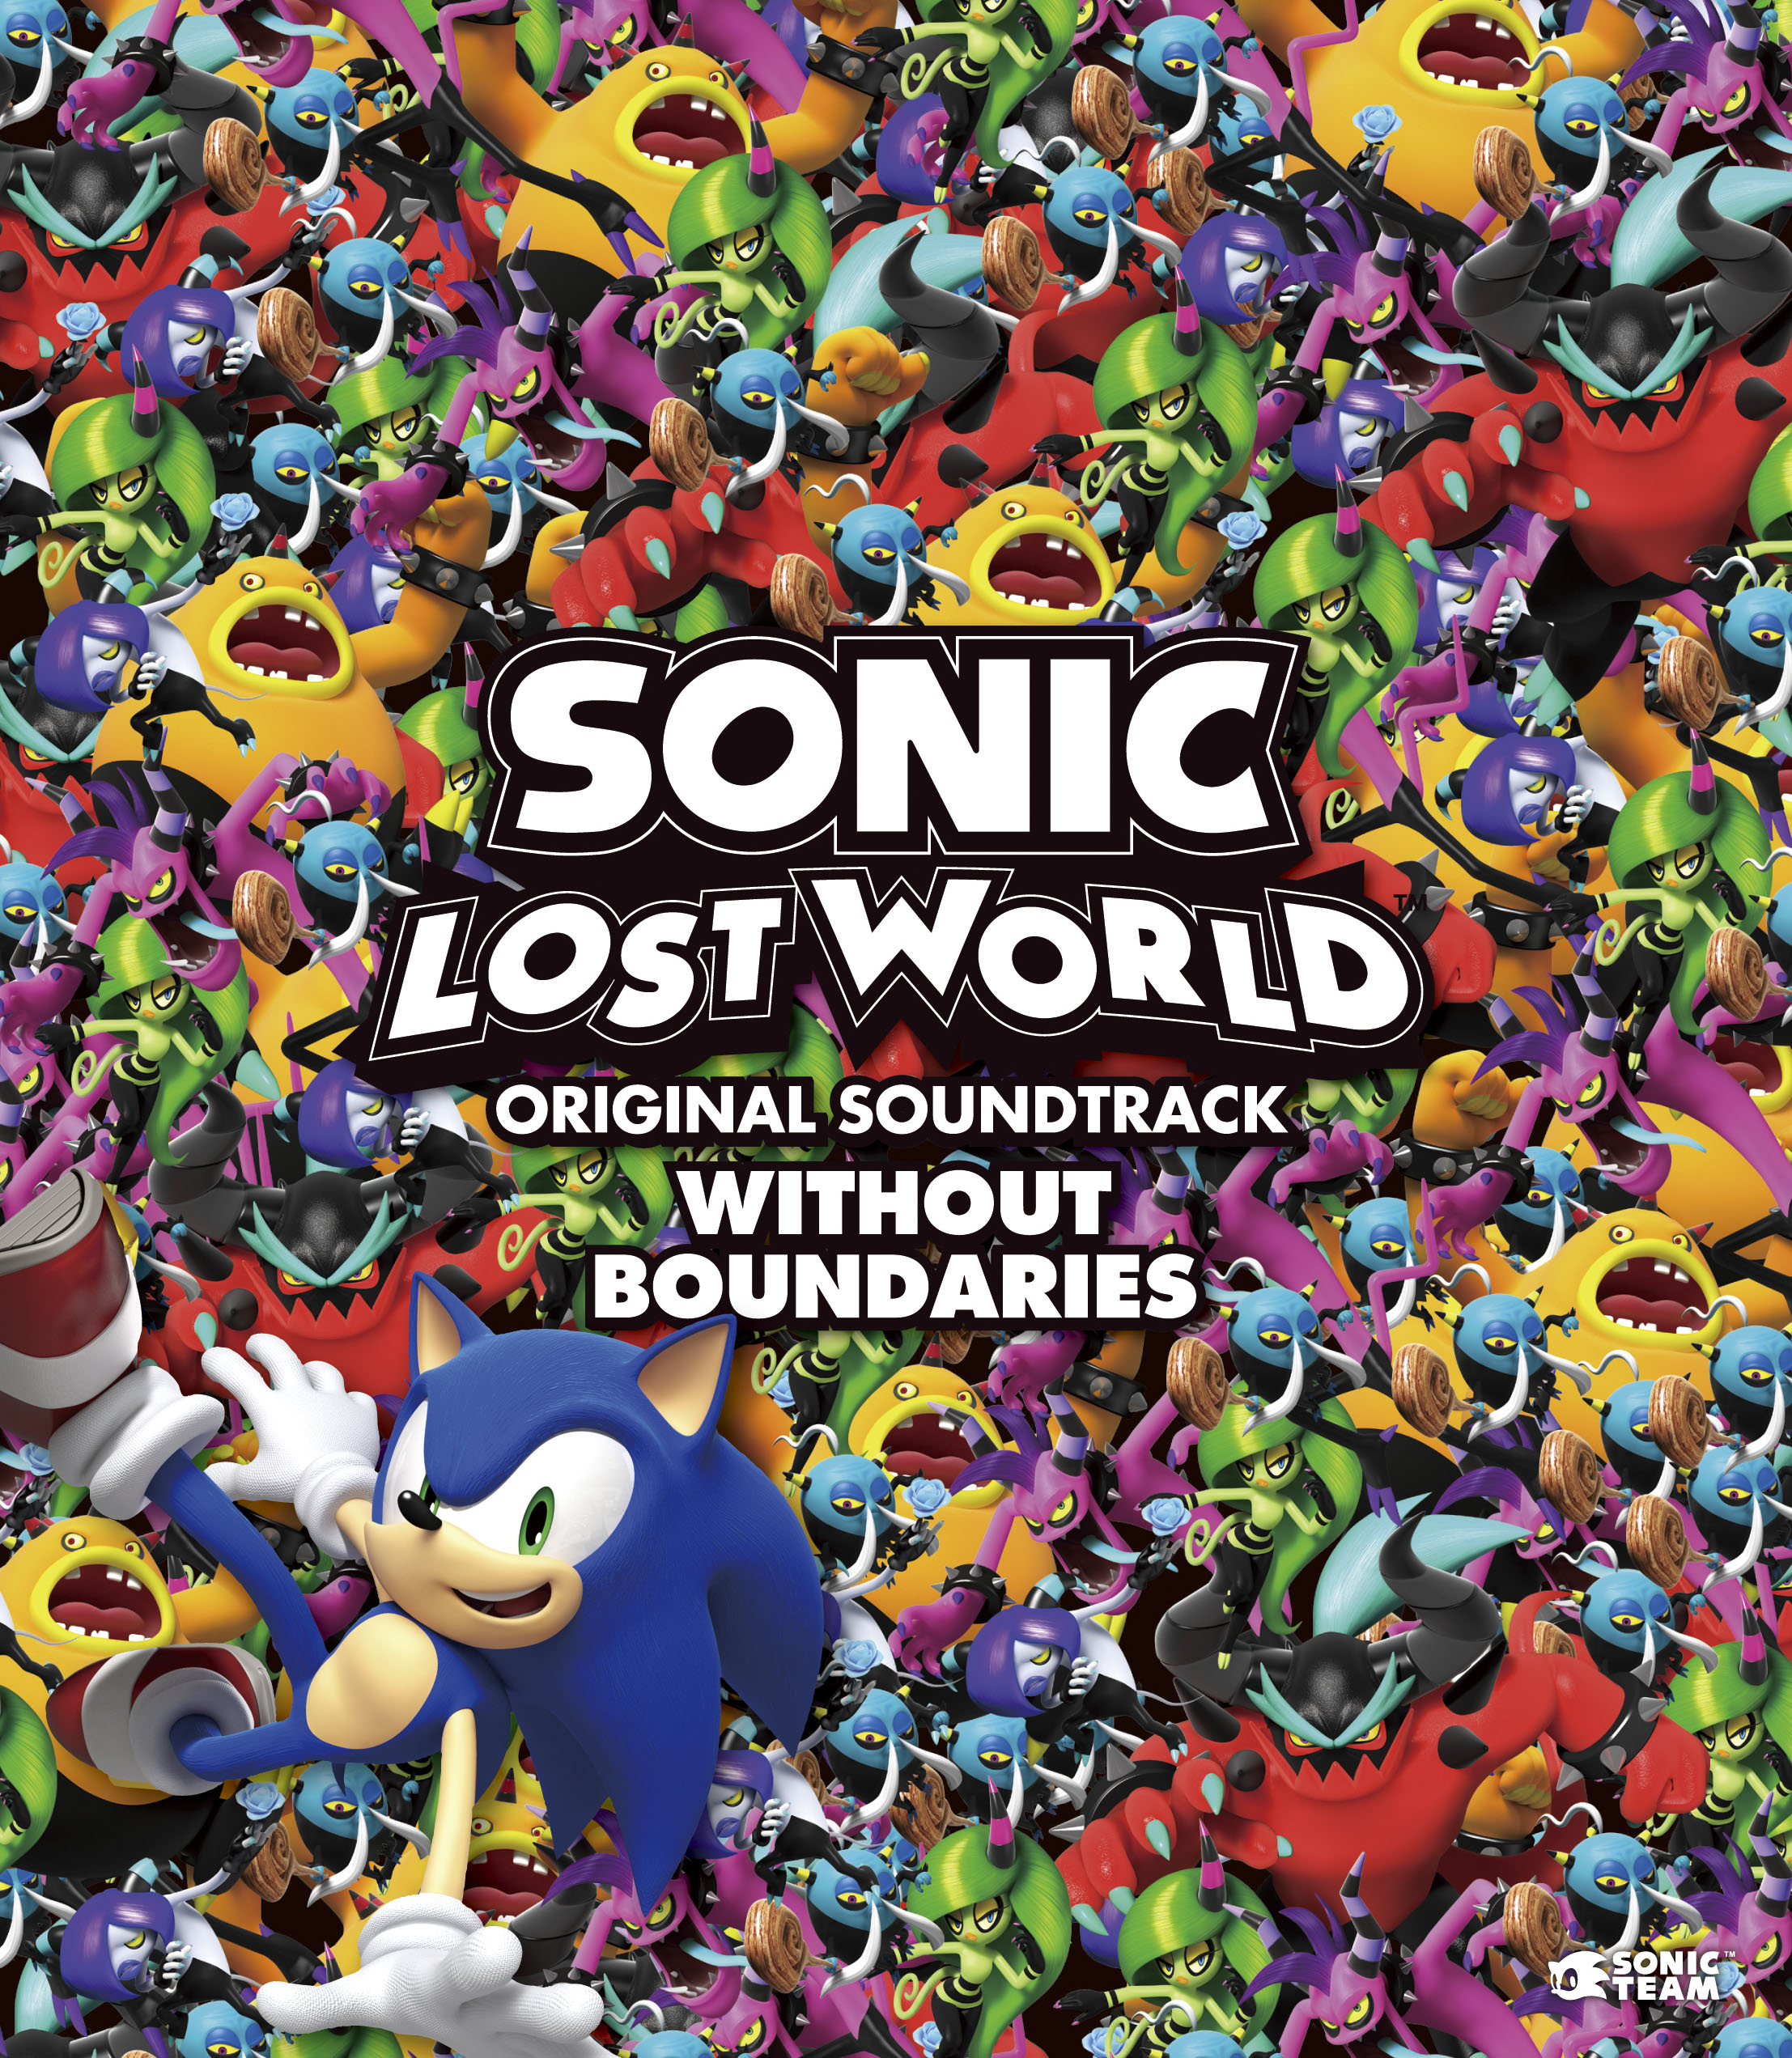 sonic cd soundtrack removed from itunes